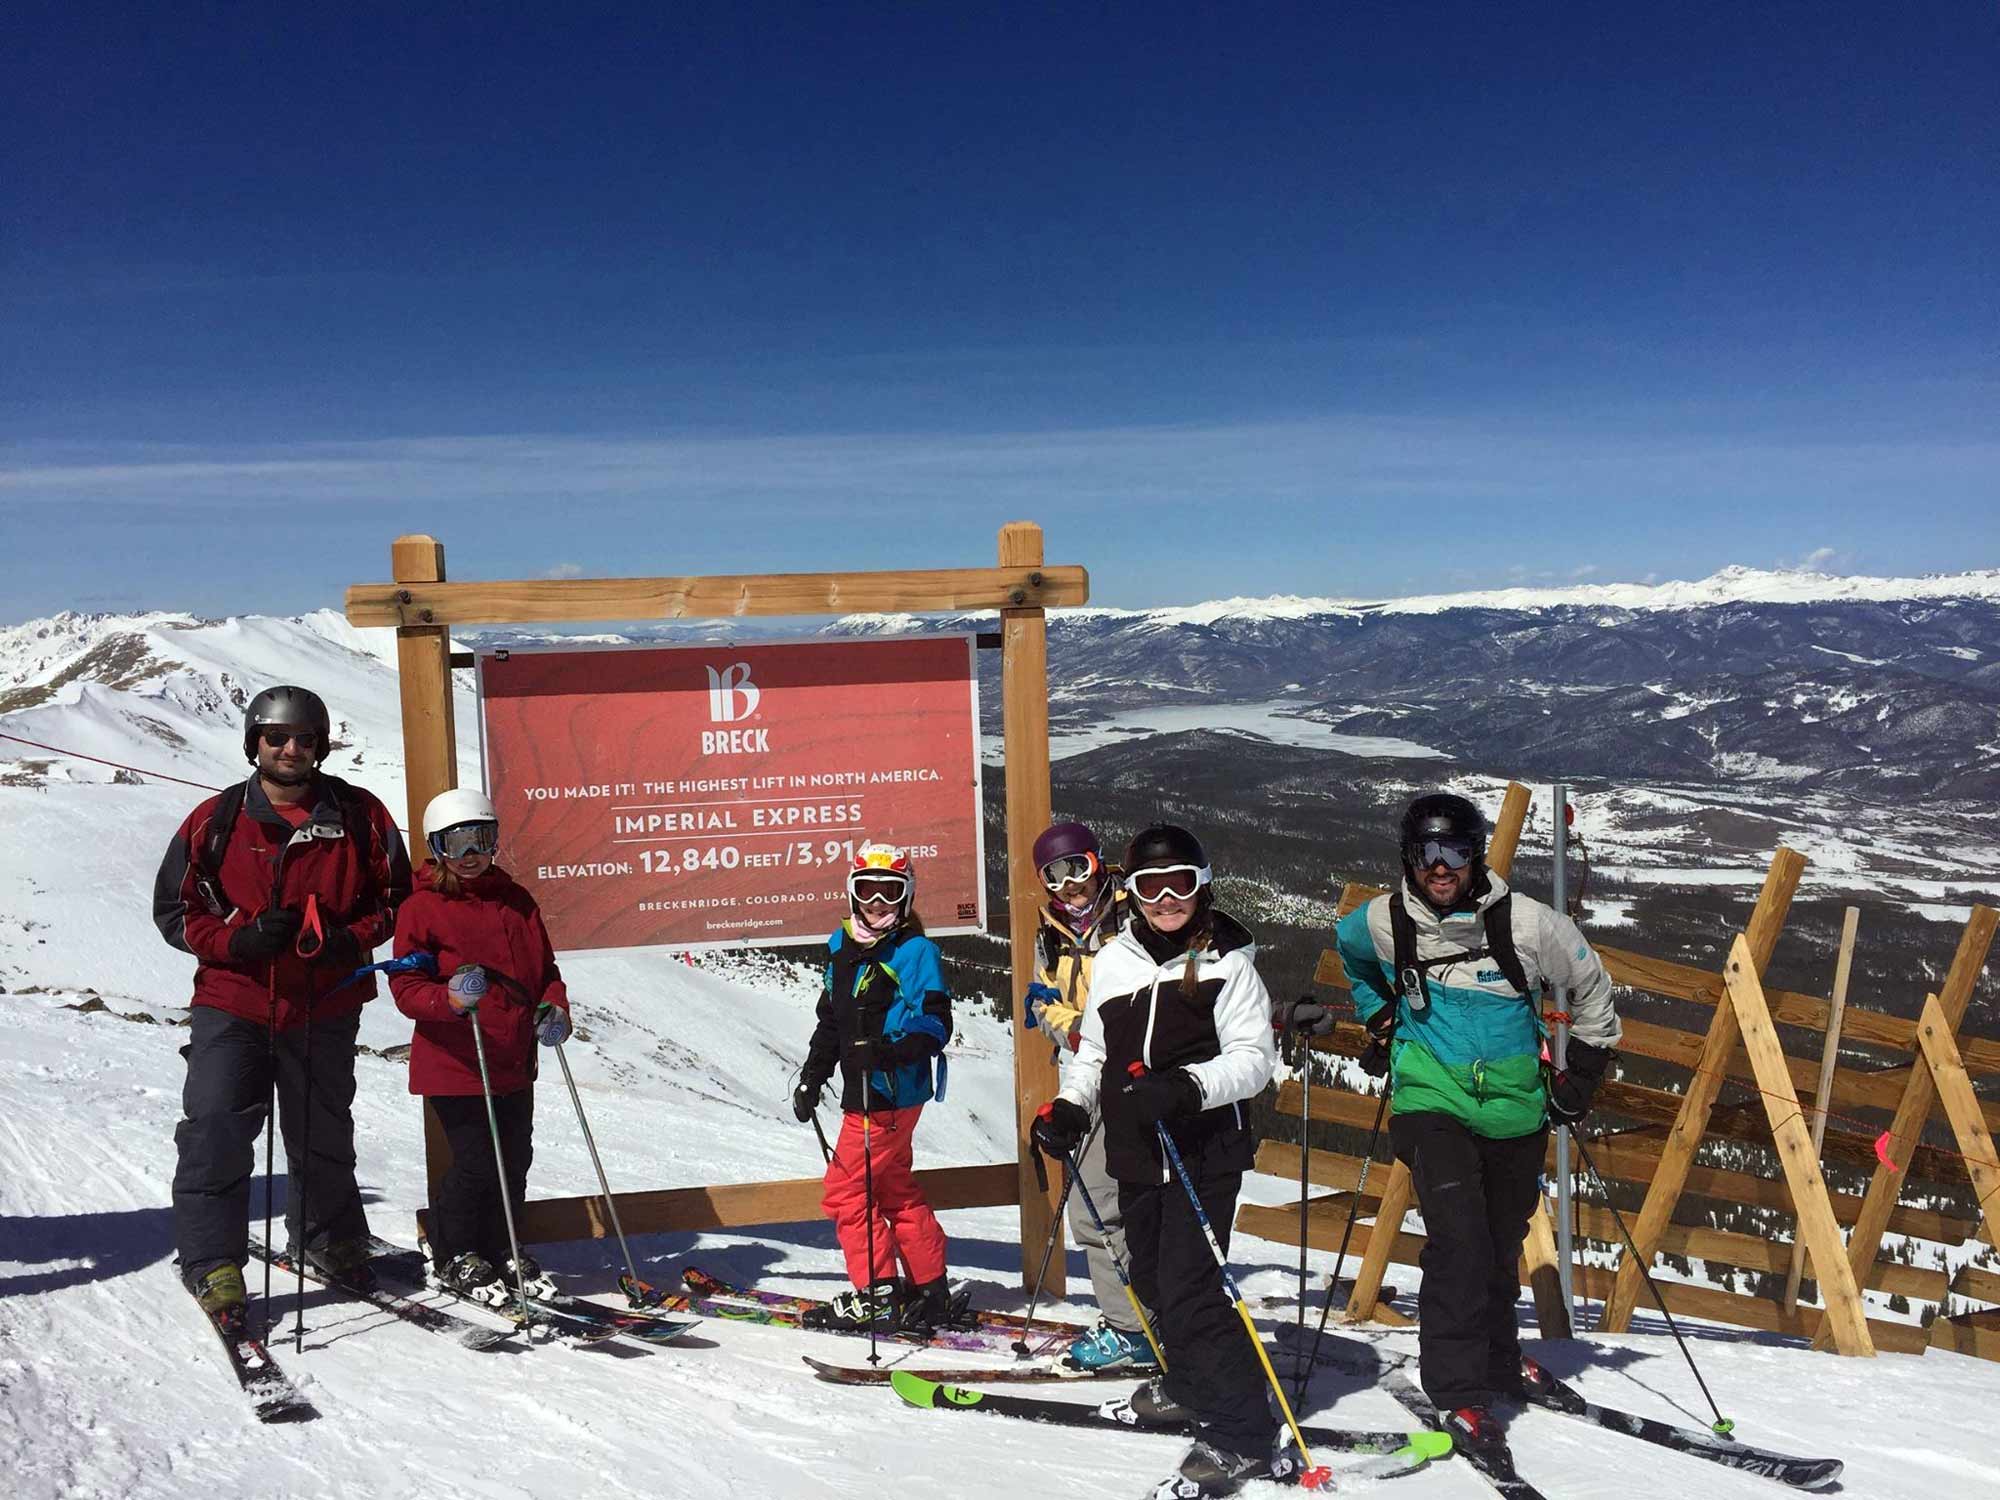 Breton with ski mountain with children in front of sign